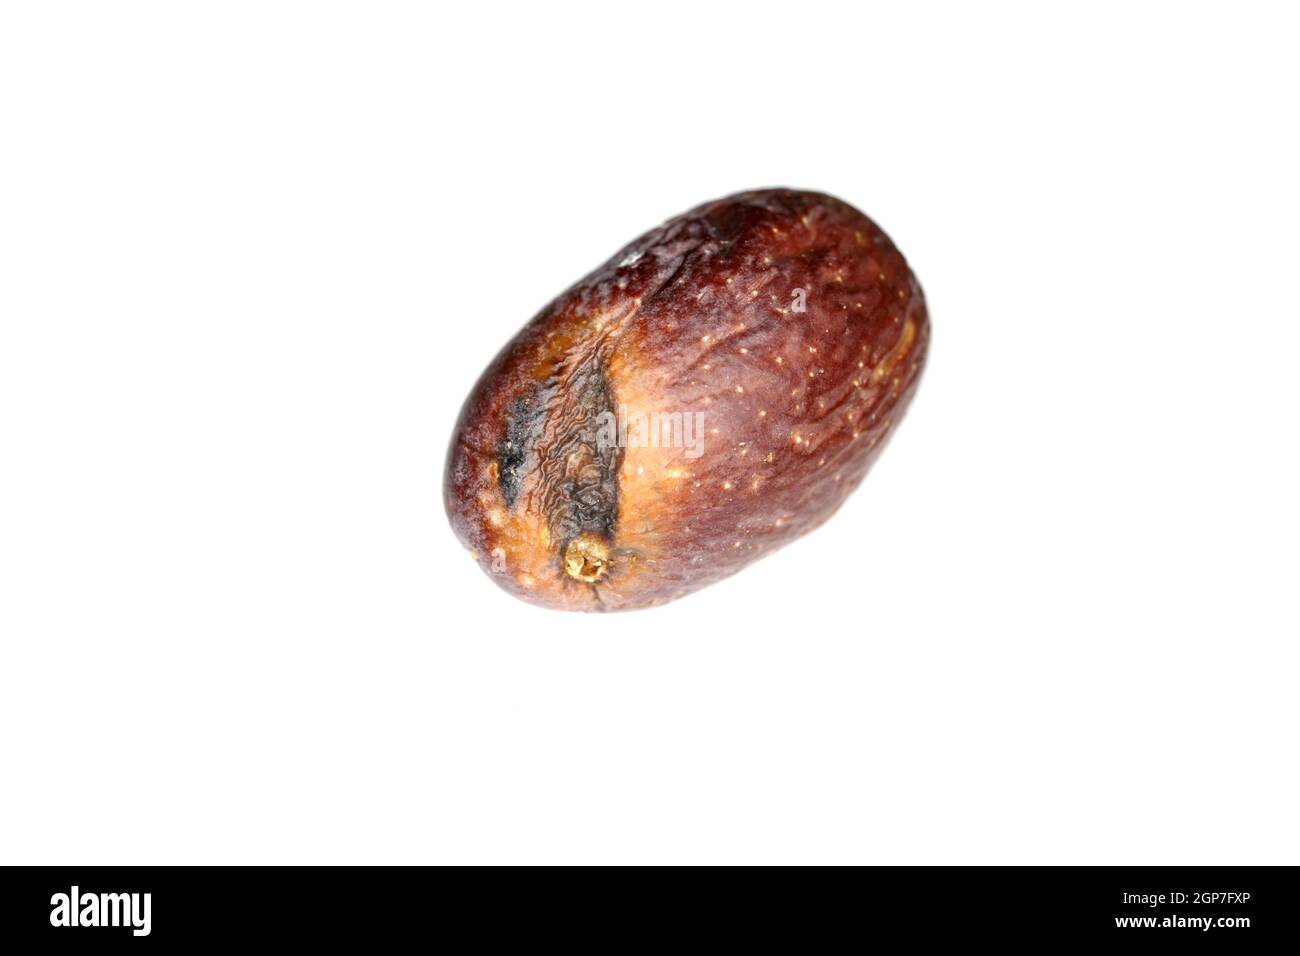 Olive fruit damaged by Olive Fruit fly- Bactrocera oleae. One of the most important olive pests. Stock Photo